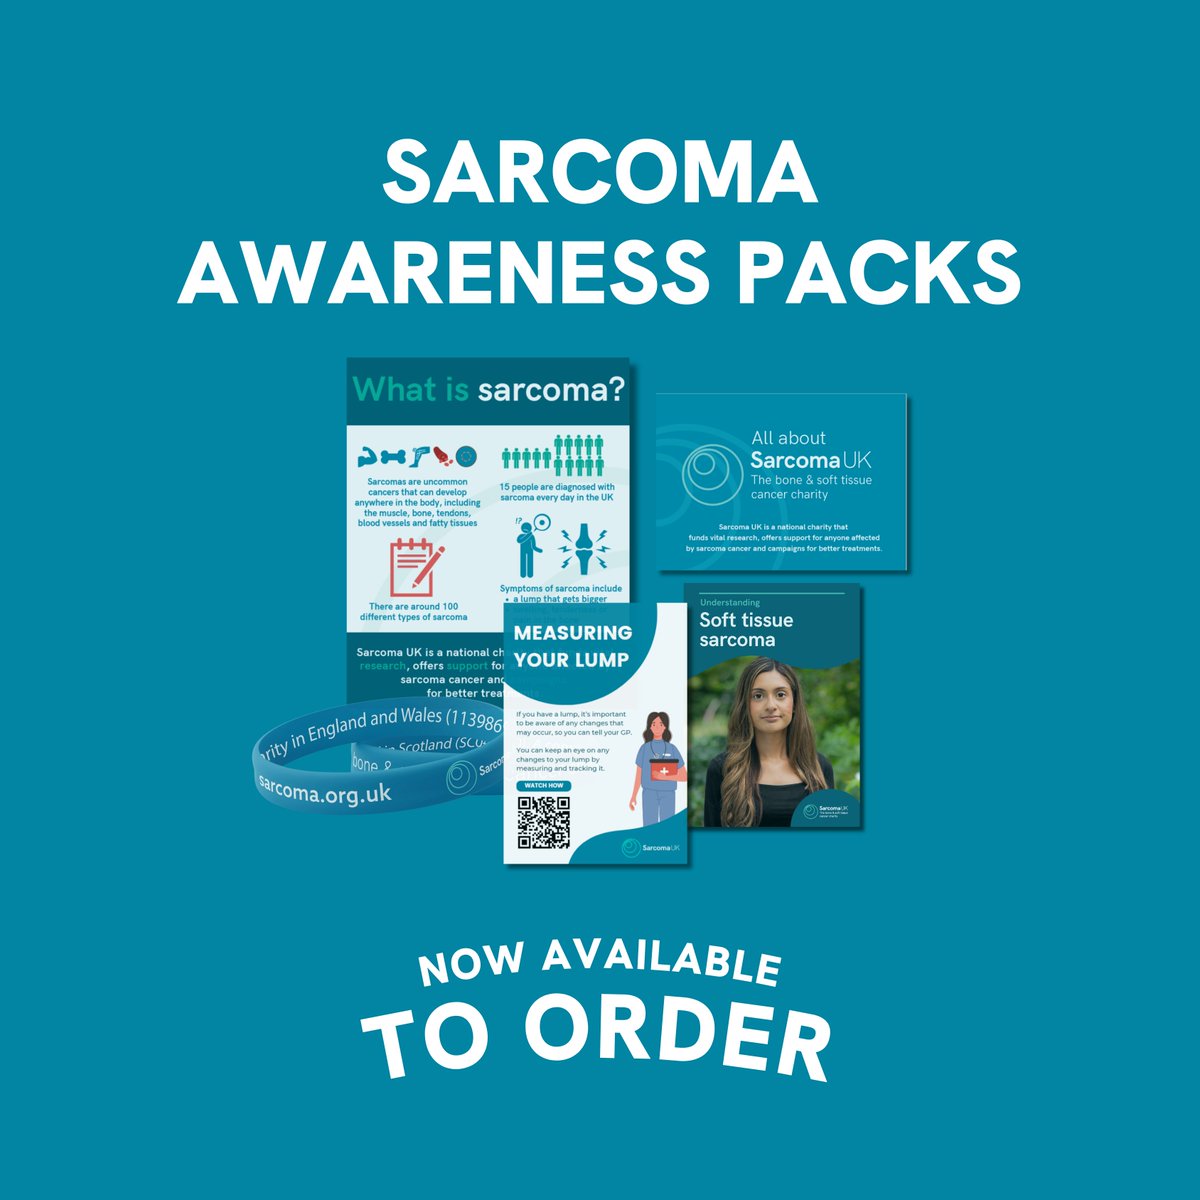 July is Sarcoma Awareness Month. Our awareness packs are filled with resources like information booklets, support line materials, wristbands, and our new A3 poster on measuring lumps. Head to shop.sarcoma.org.uk to order yours today. 💙 #sarcoma #sarcomaawareness